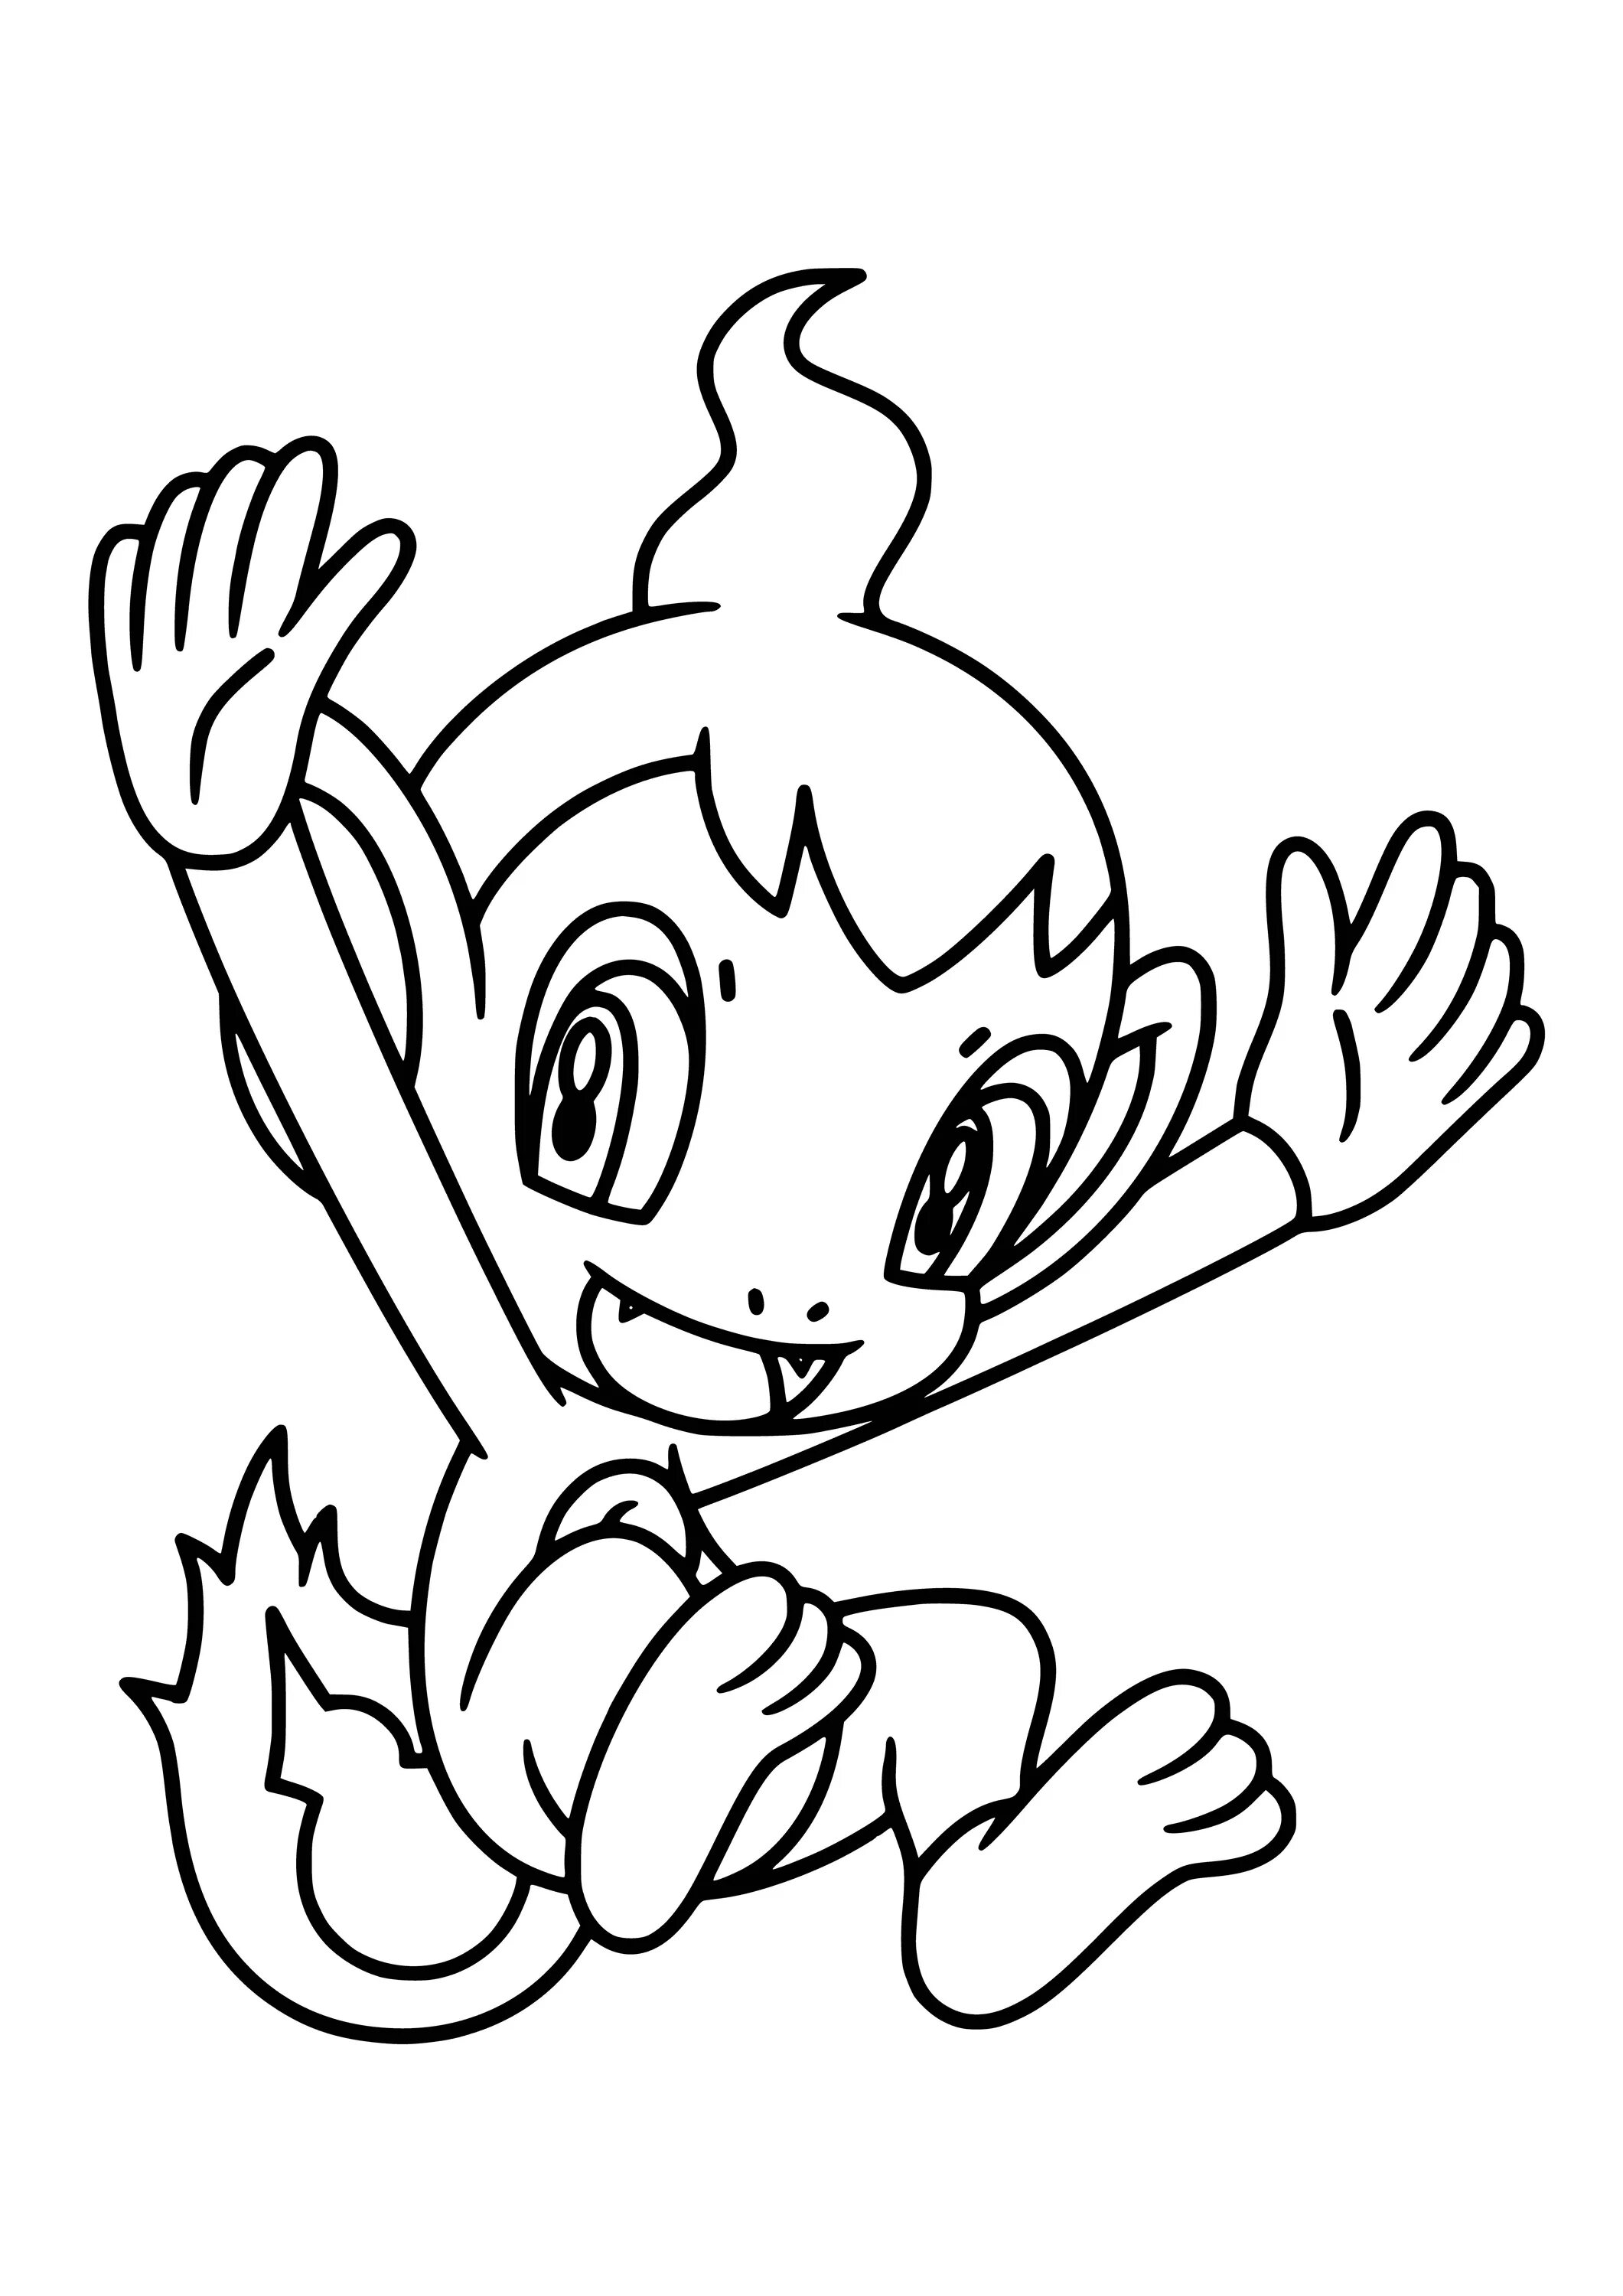 Glamorous chimchar coloring page